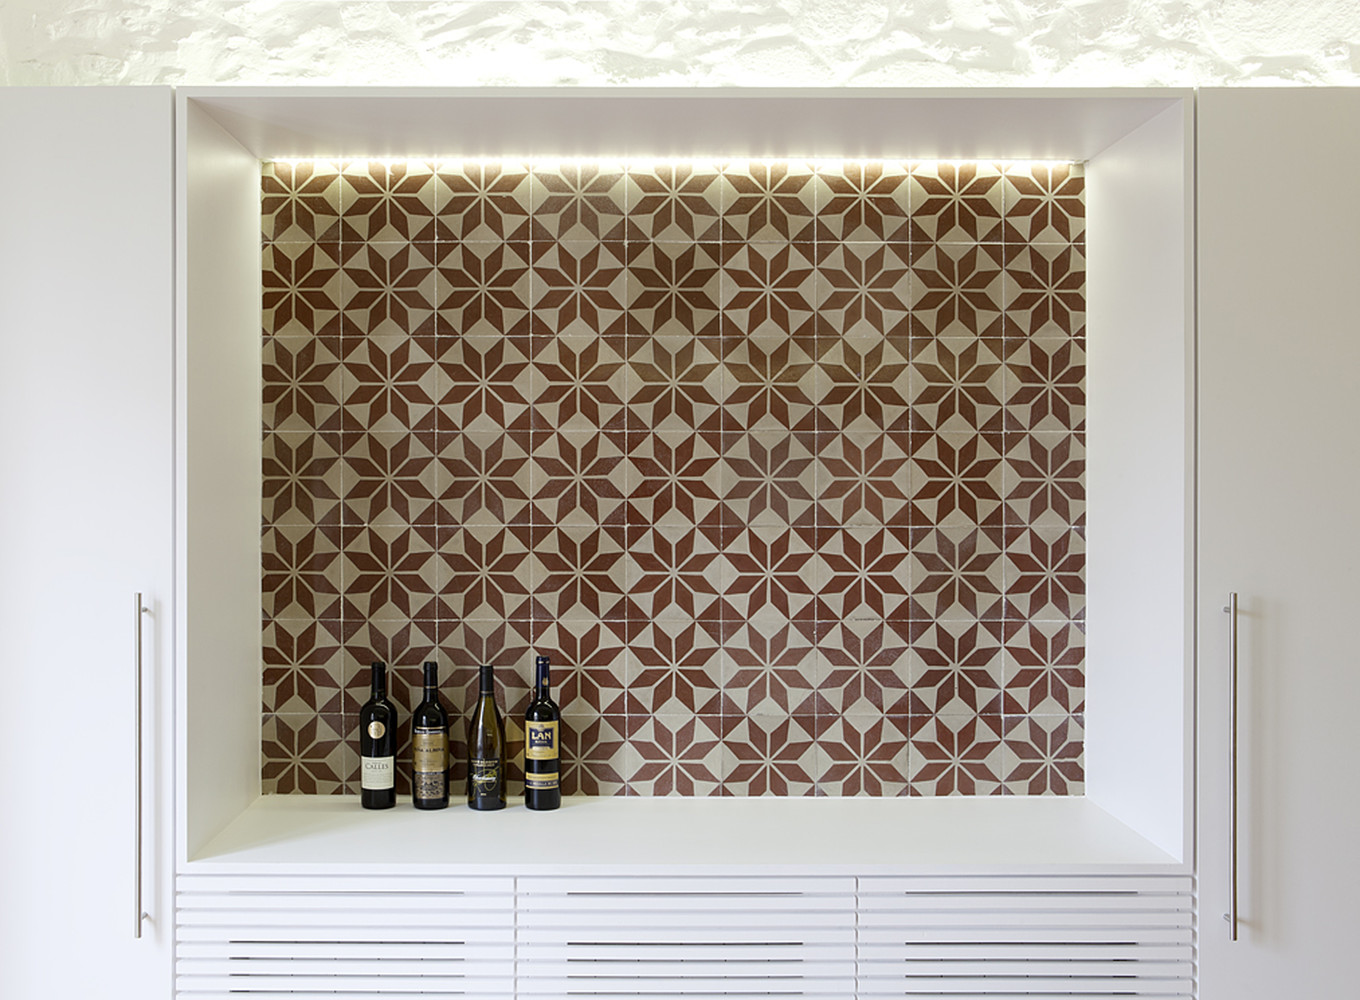 The Details of Paterned Tiles in the Kitchenset